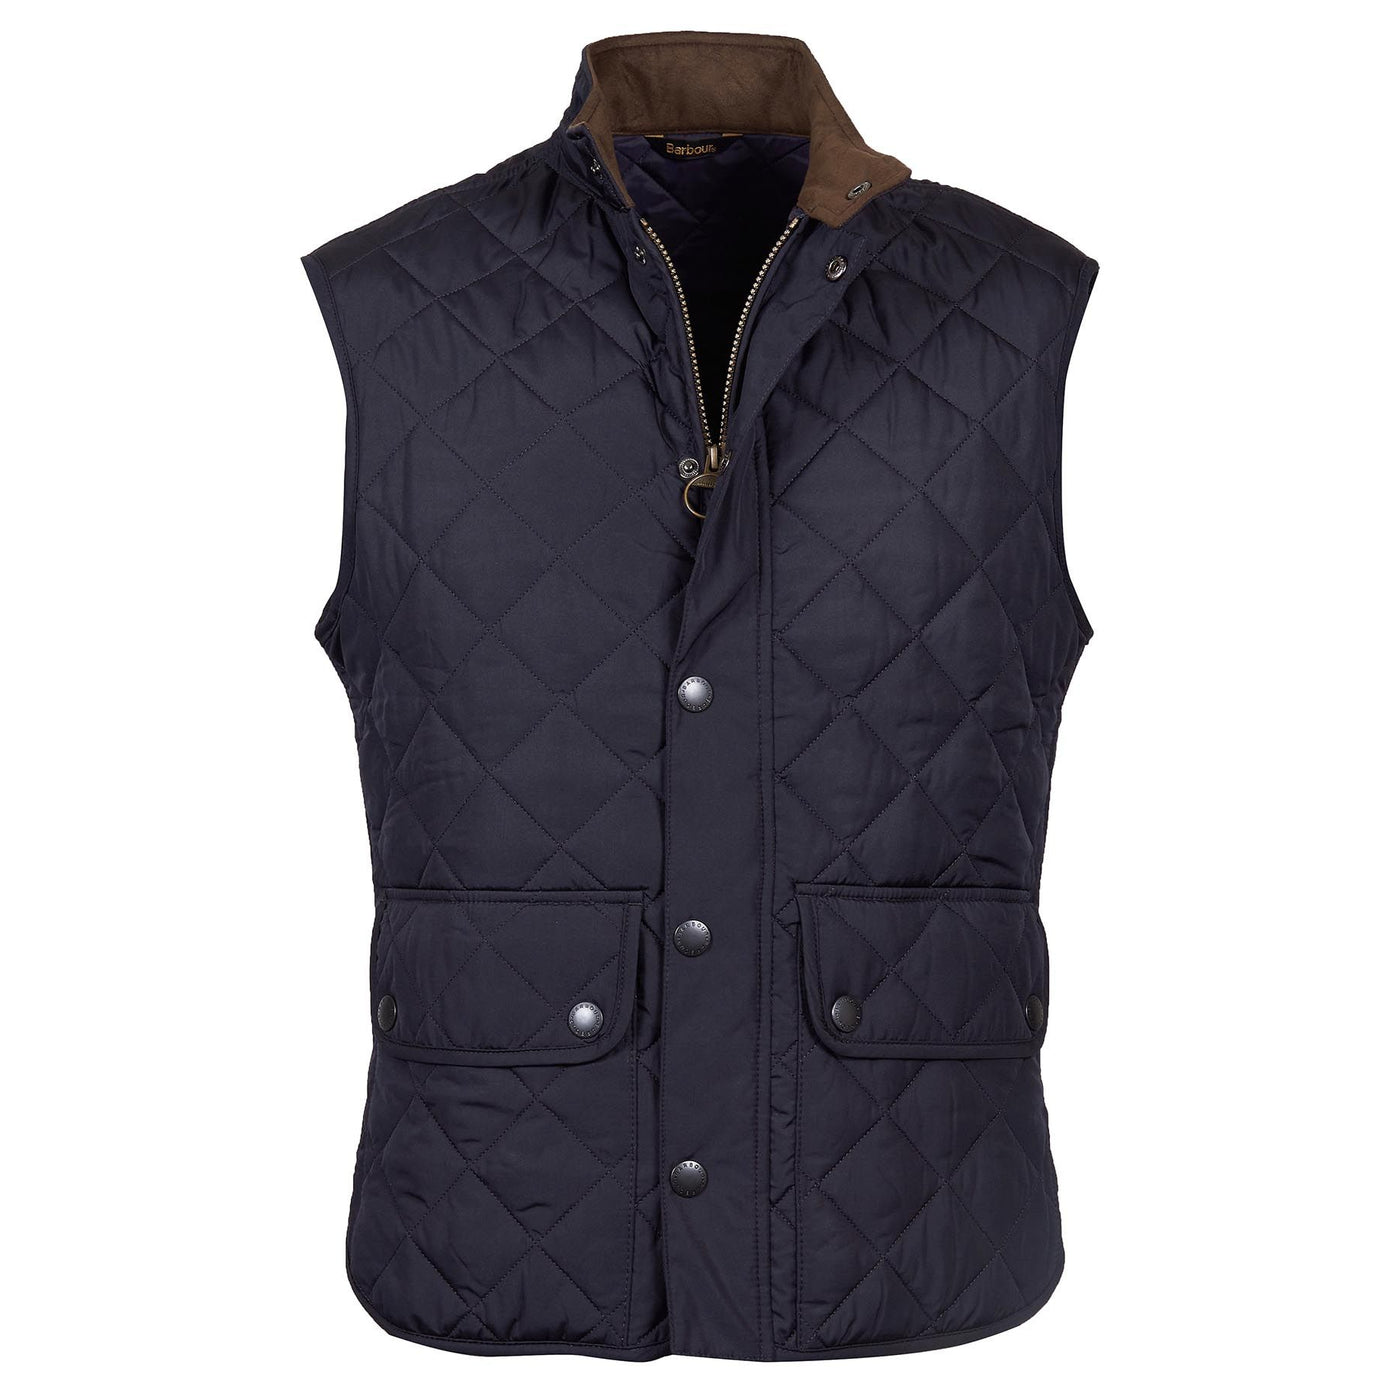 Barbour Men's Lowerdale Gilet-MENS CLOTHING-NAVY-M-Kevin's Fine Outdoor Gear & Apparel